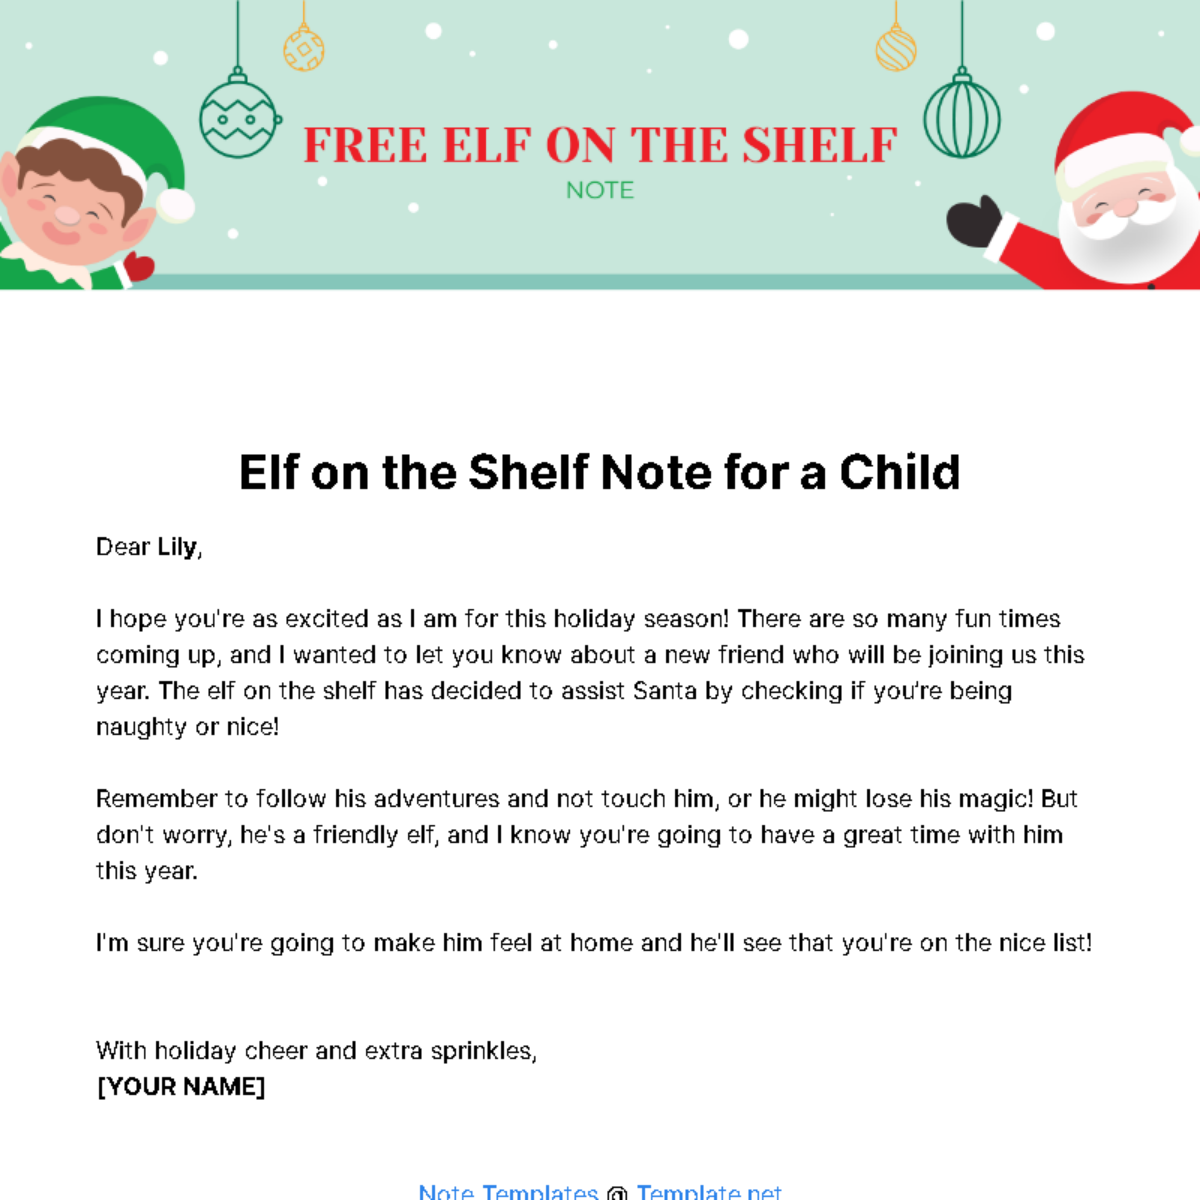 Free Elf on the Shelf Note Template